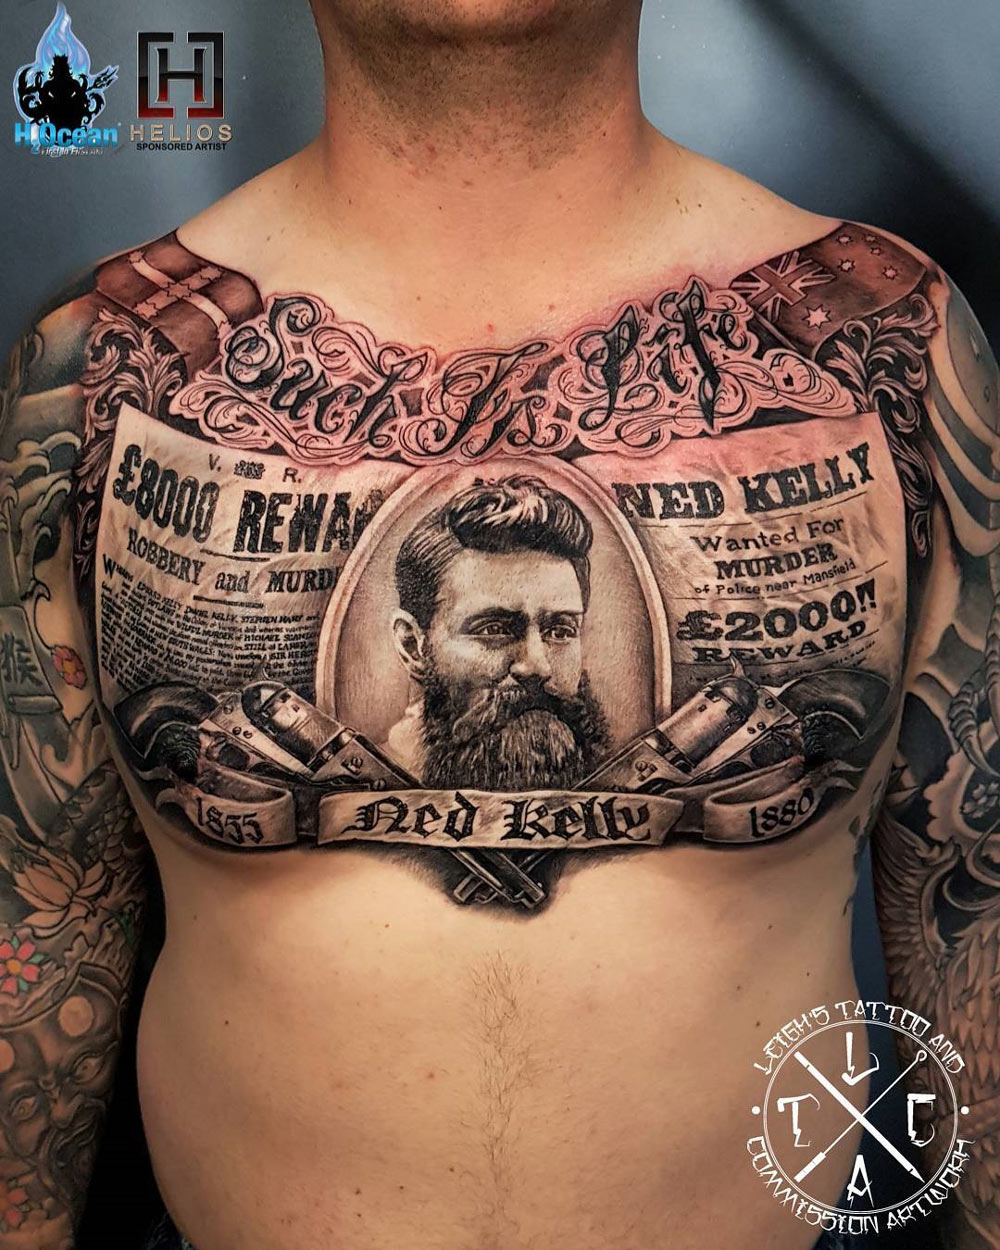 Ned Kelly tattoo, men's chest piece